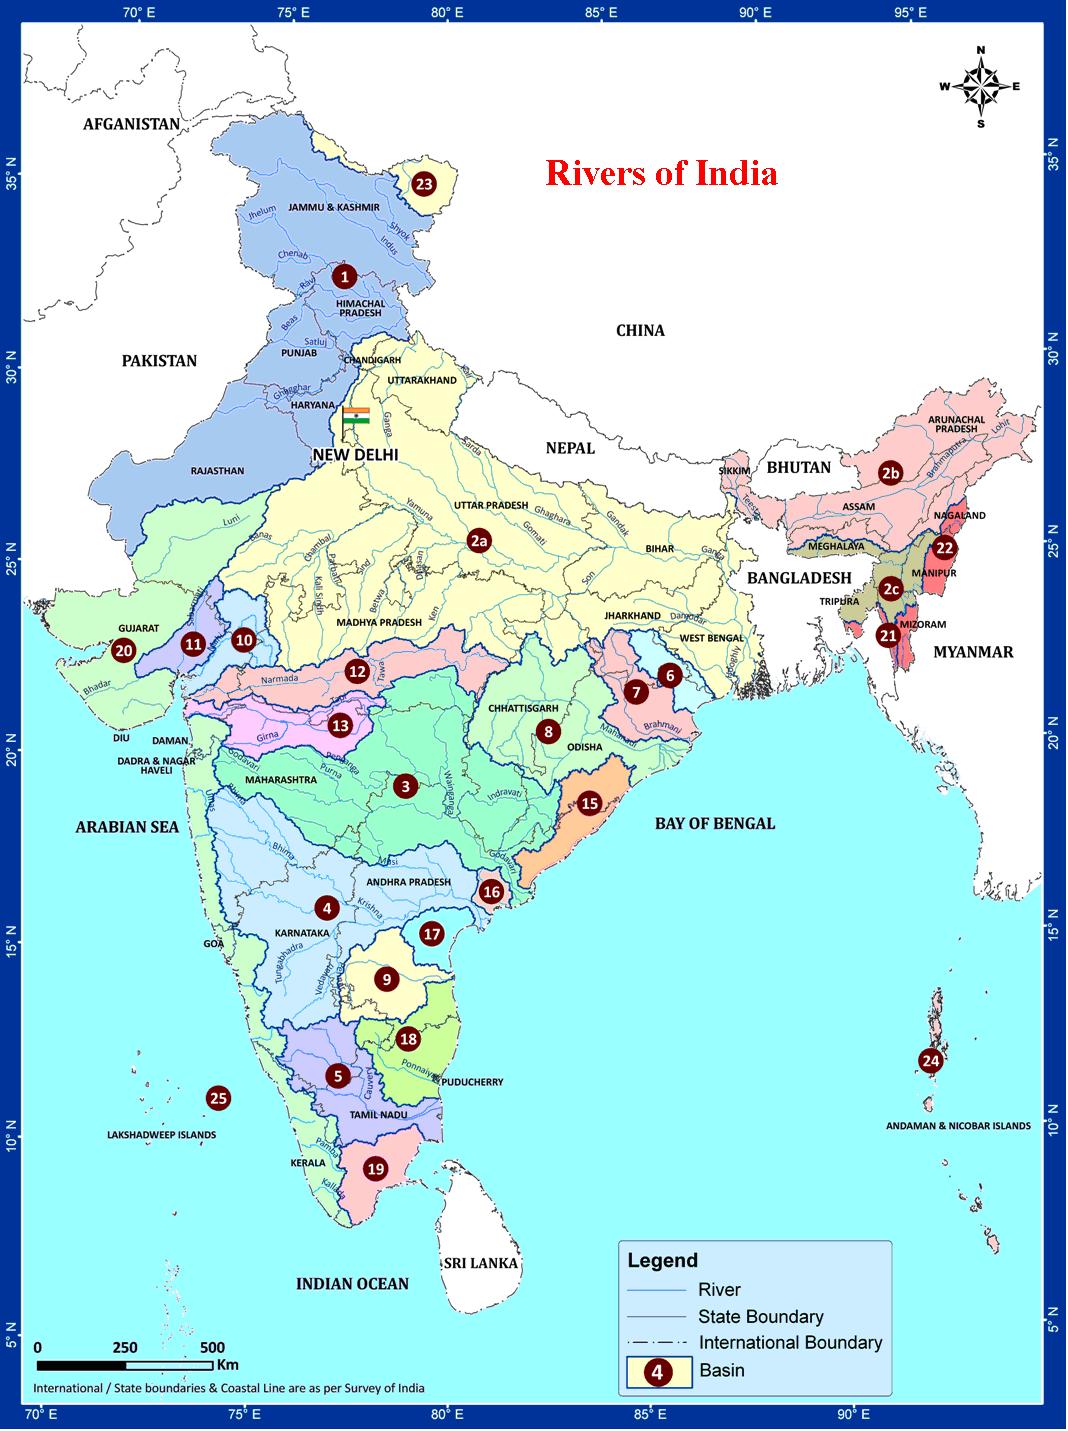 rivers of india essay in english